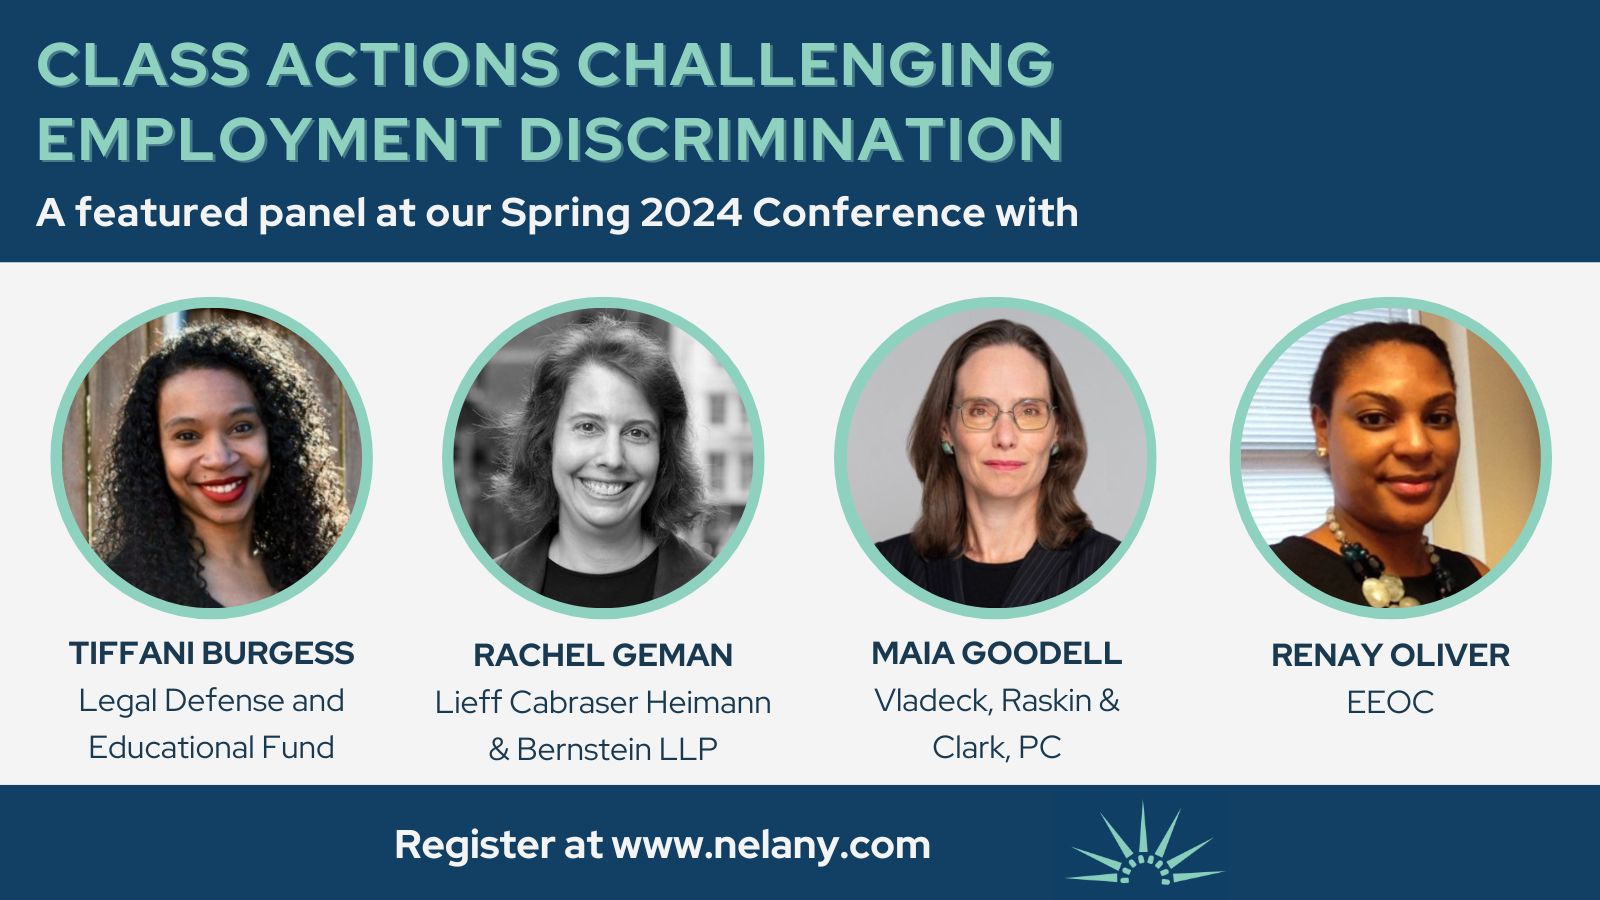 Rachel Geman to Speak at Upcoming NELA NY Chapter Spring 2024 Conference